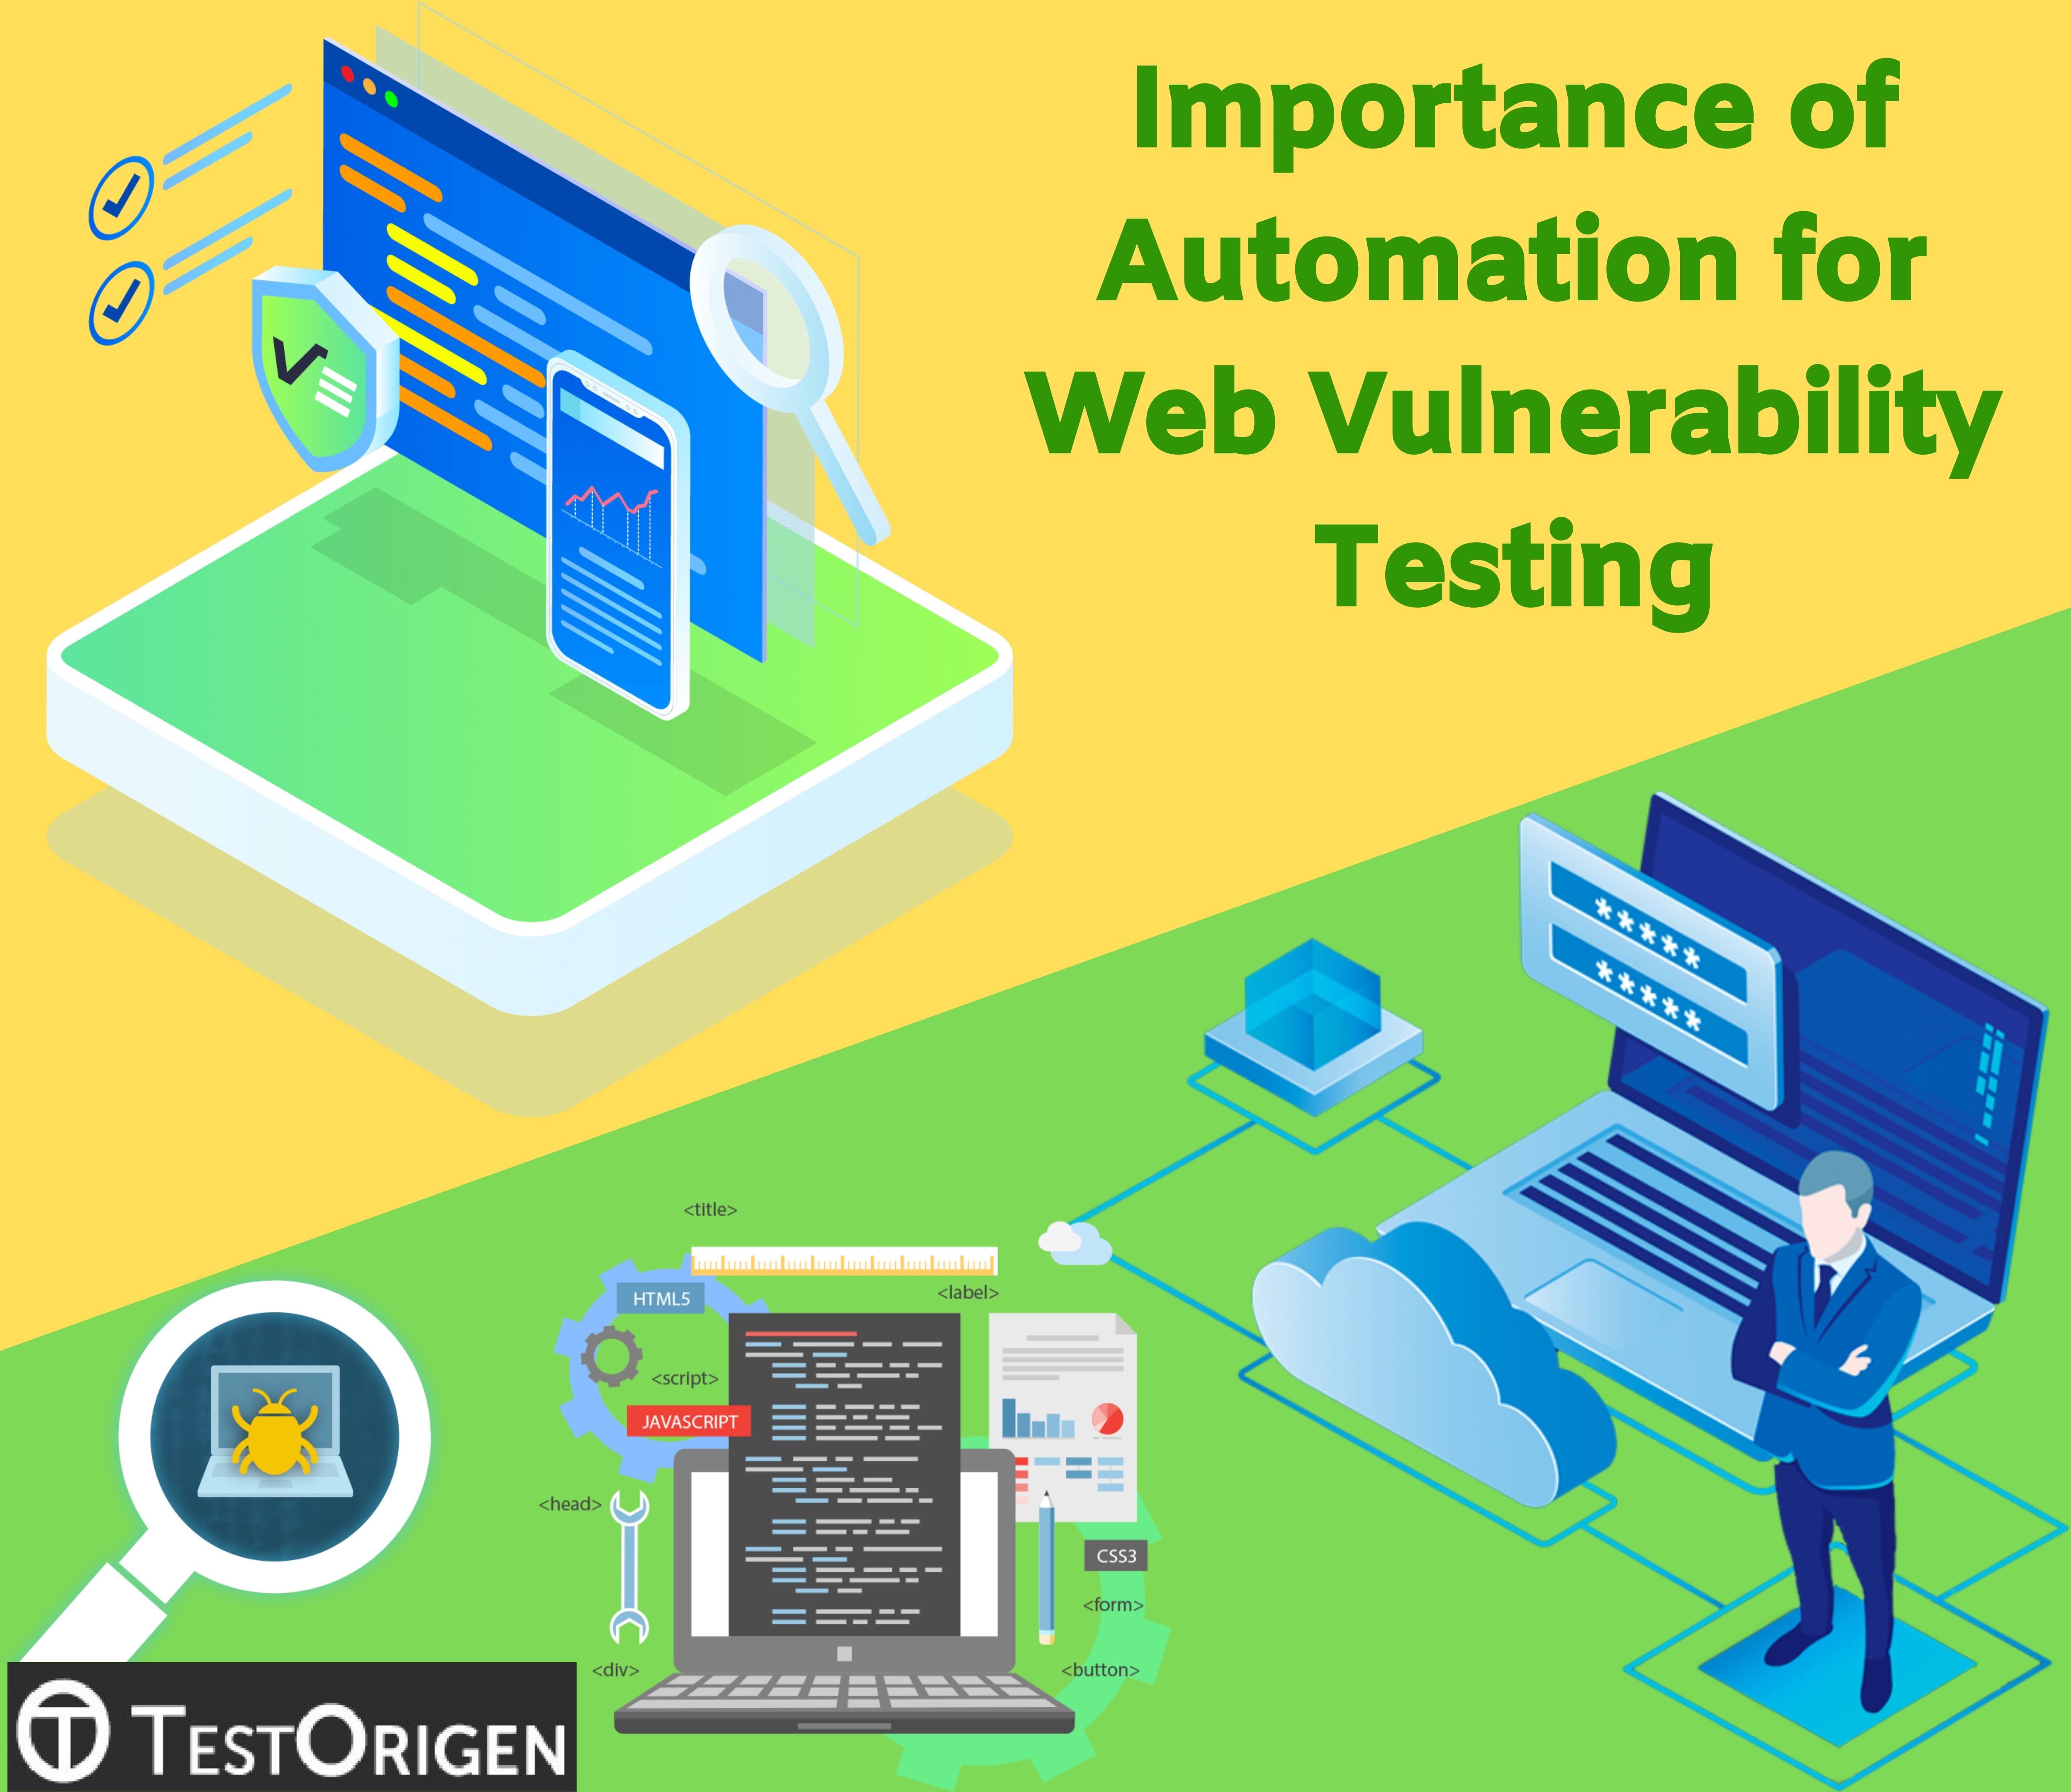 Importance of Automation for Web Vulnerability Testing